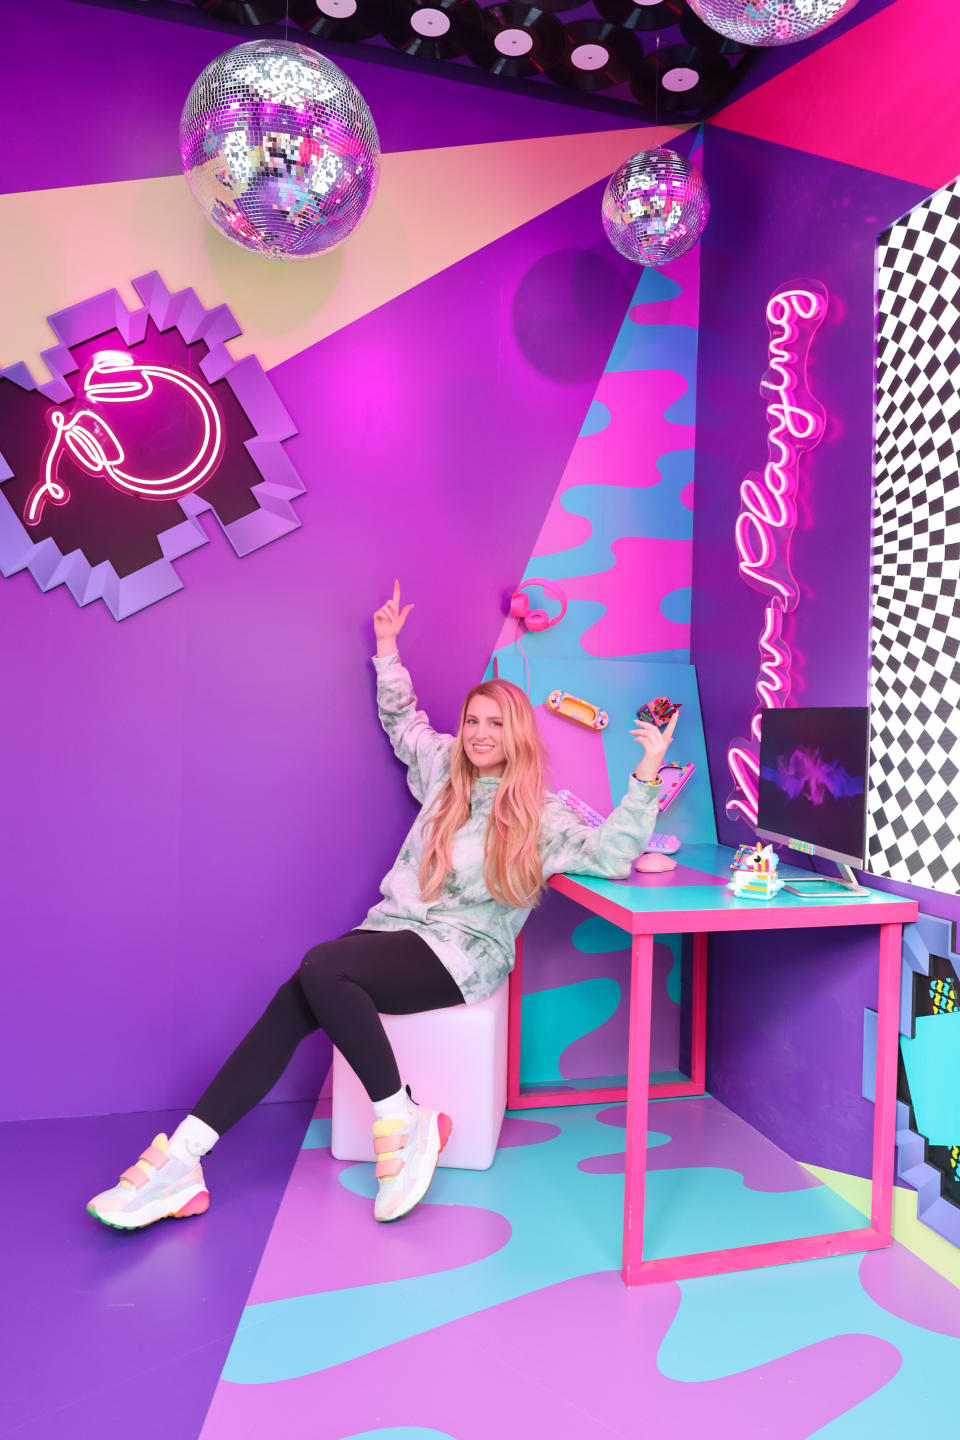 Meghan Trainor at the LEGO DOTS Aesthetics Pop-Up experience at The Grove in Los Angeles on Thursday, August 25, 2022. (Photo by Mark Von holden/Invision for The LEGO Group/AP Images) - Credit: Invision for The LEGO Group/AP